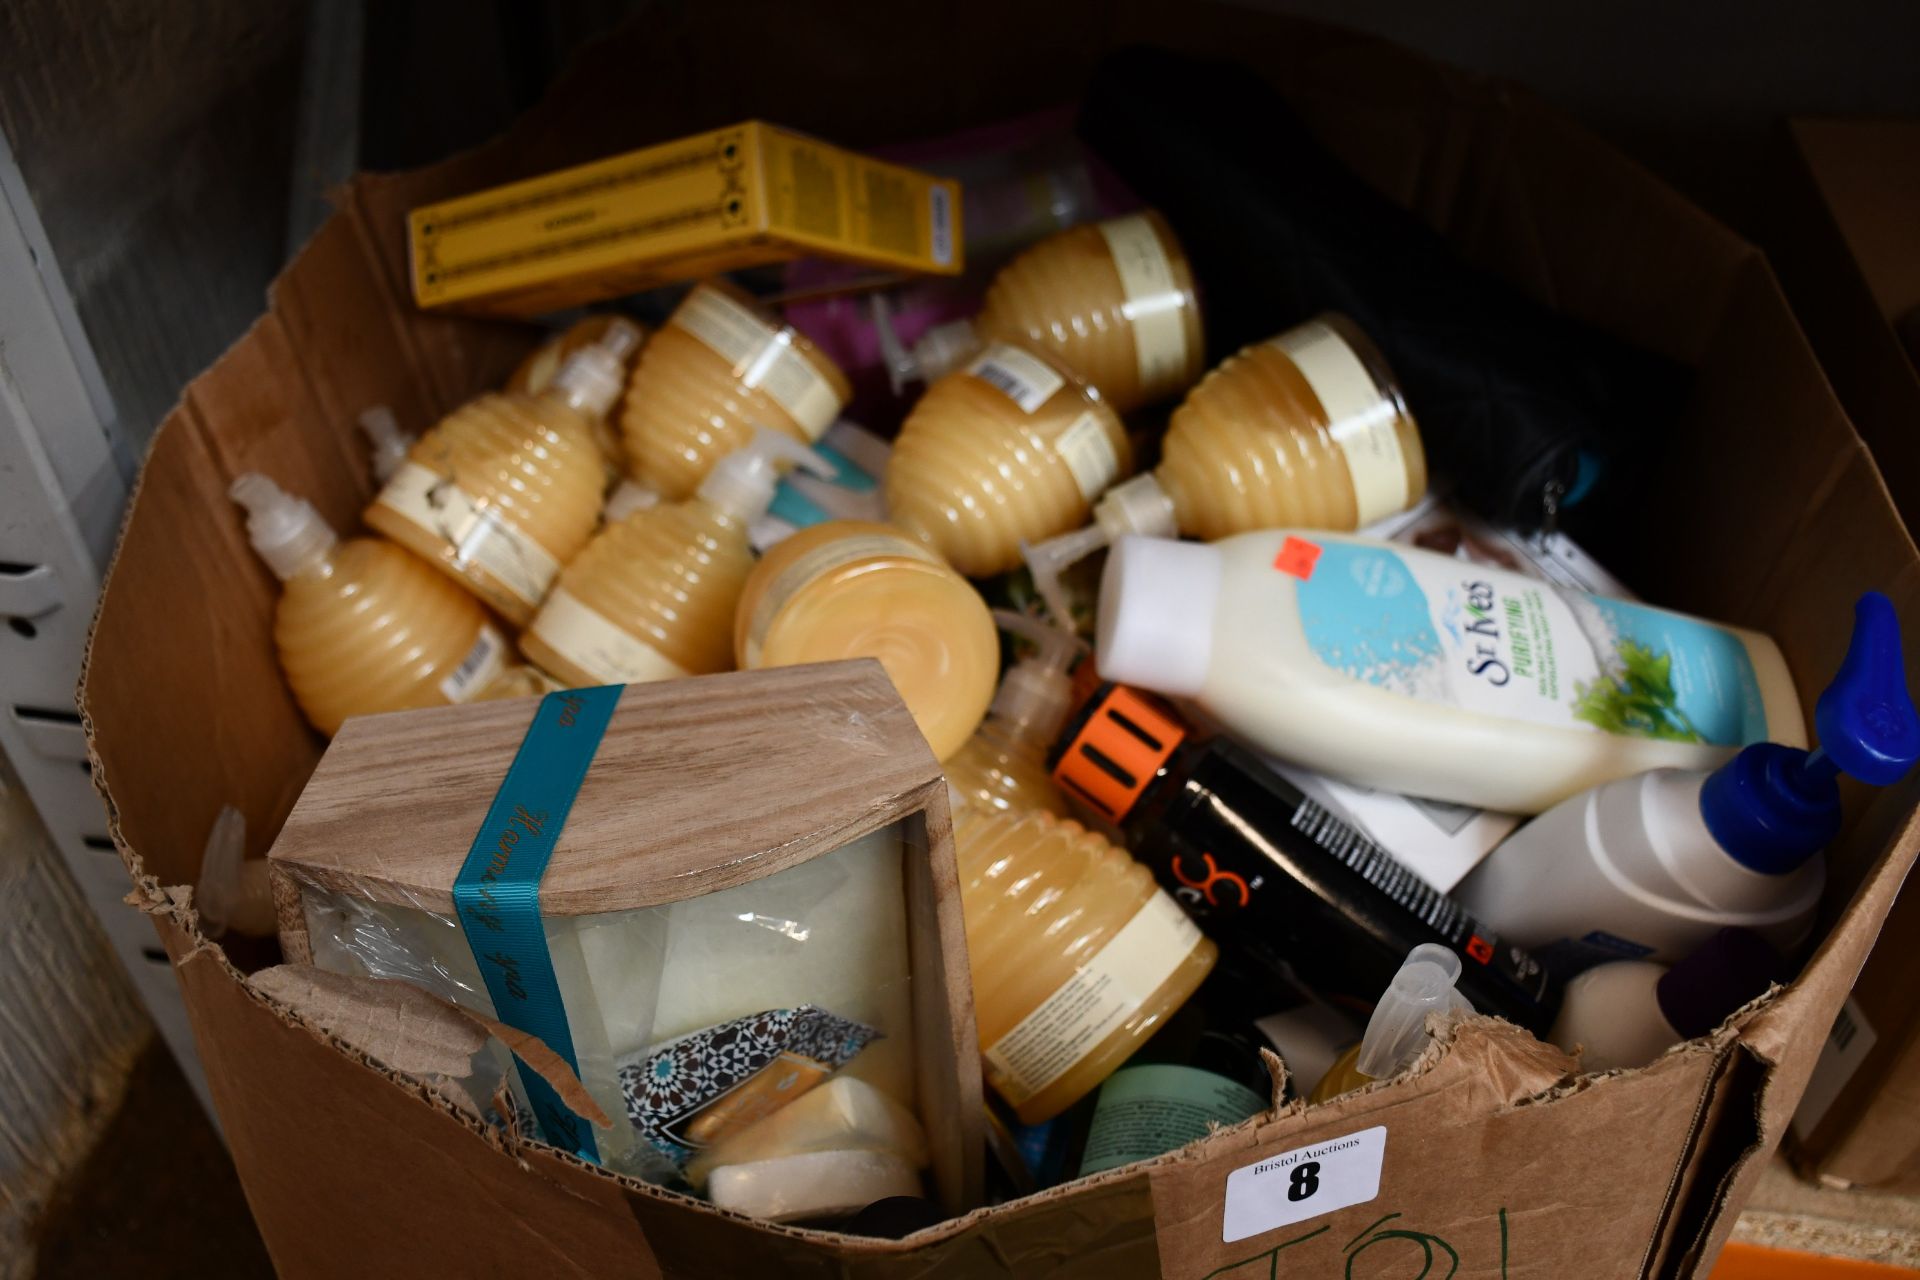 One box of miscellaneous as new toiletries, cosmetics and related items.